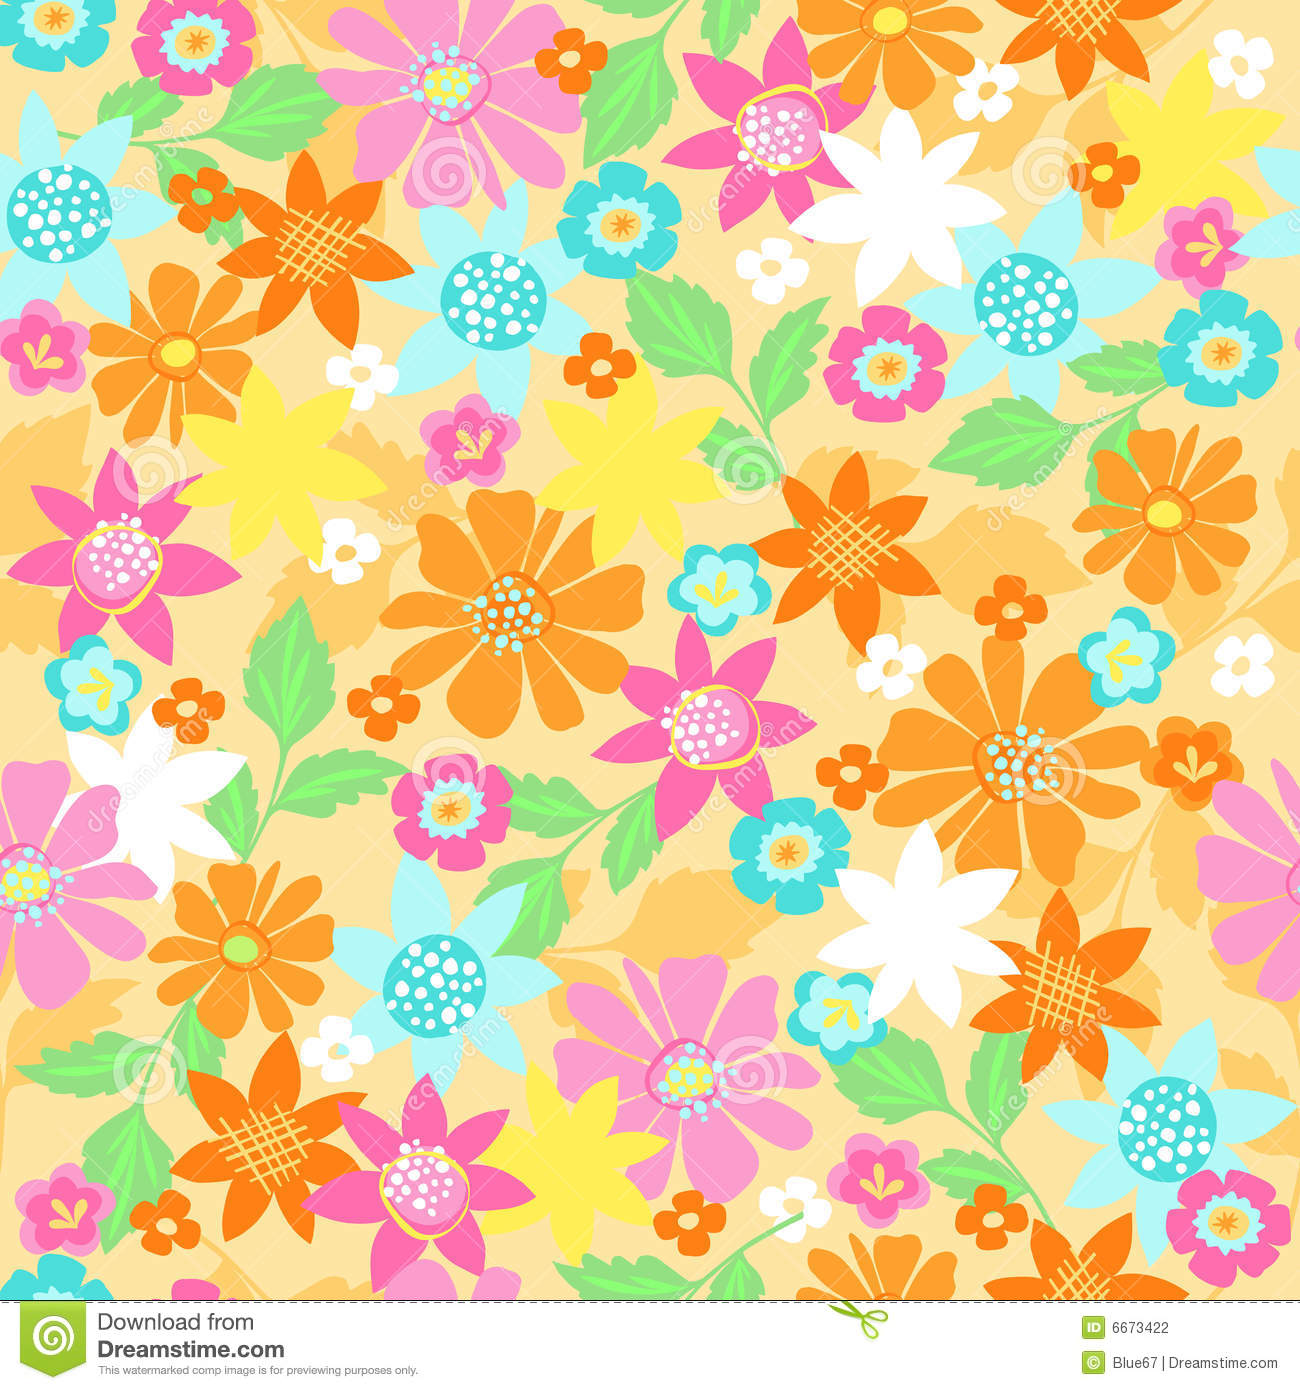 Repeat Patterns of Flowers and Leaves